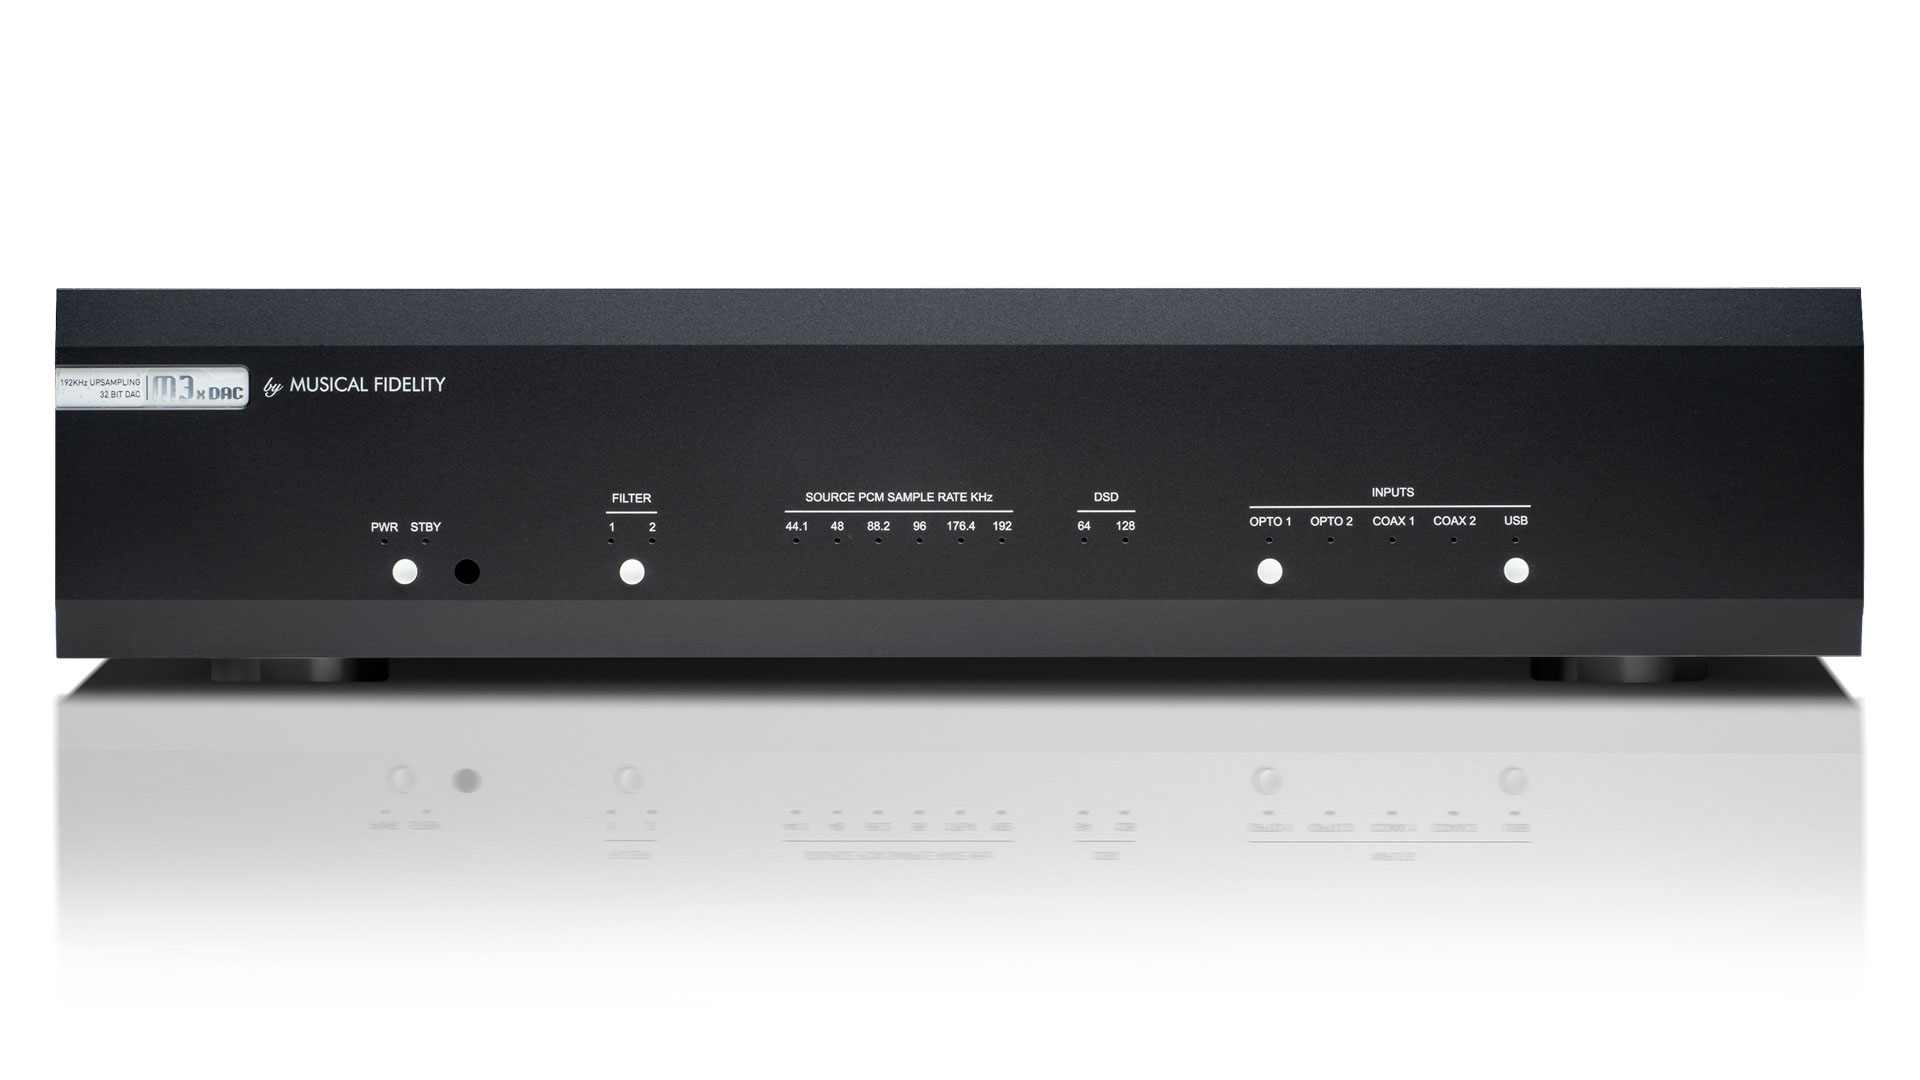 The new Musical Fidelity M3x DAC (Image Credit: Musical Fidelity)